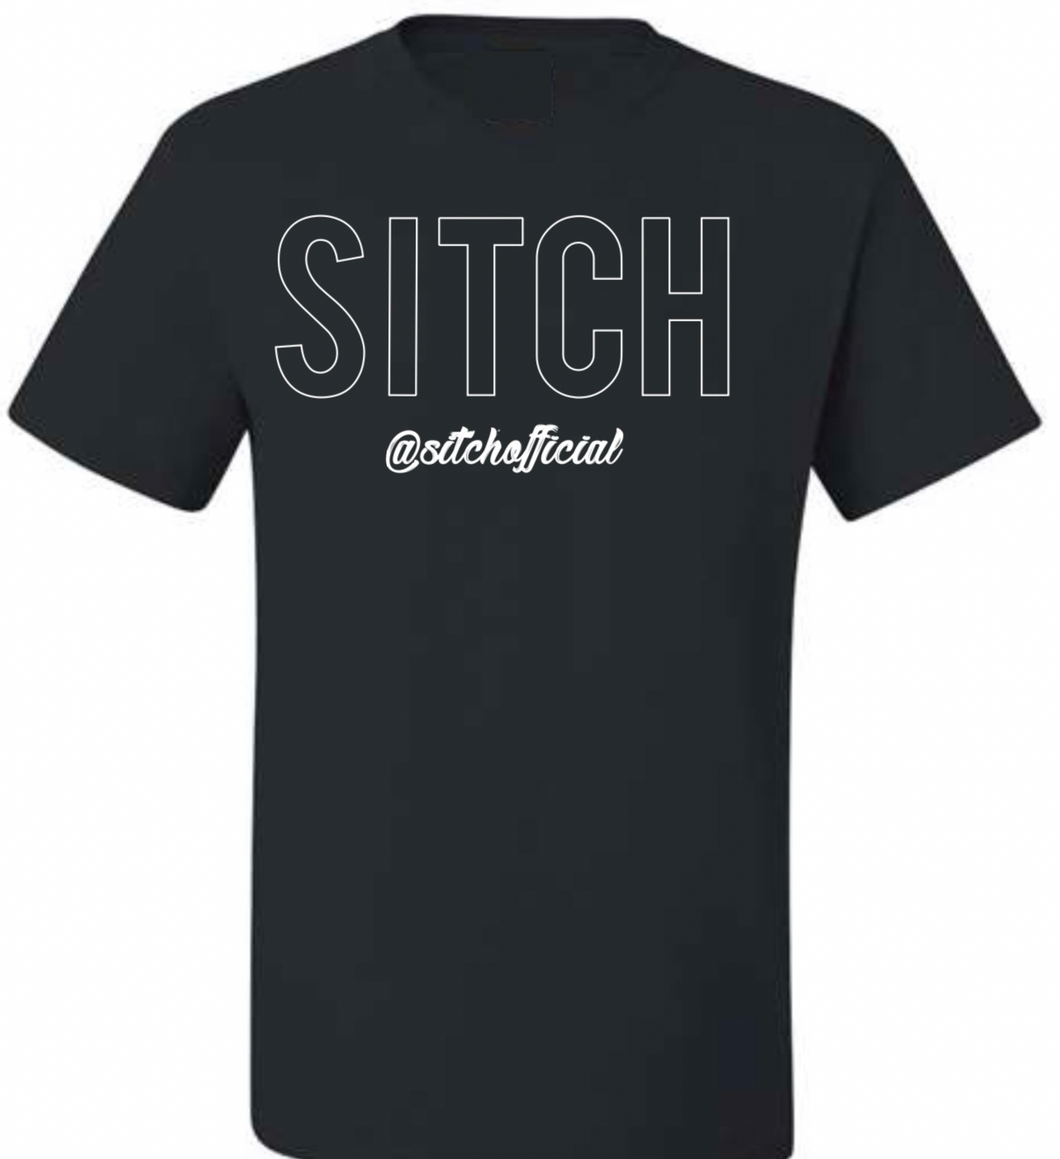 Sitch Official Tee (more inventory at SitchOfficial.com)